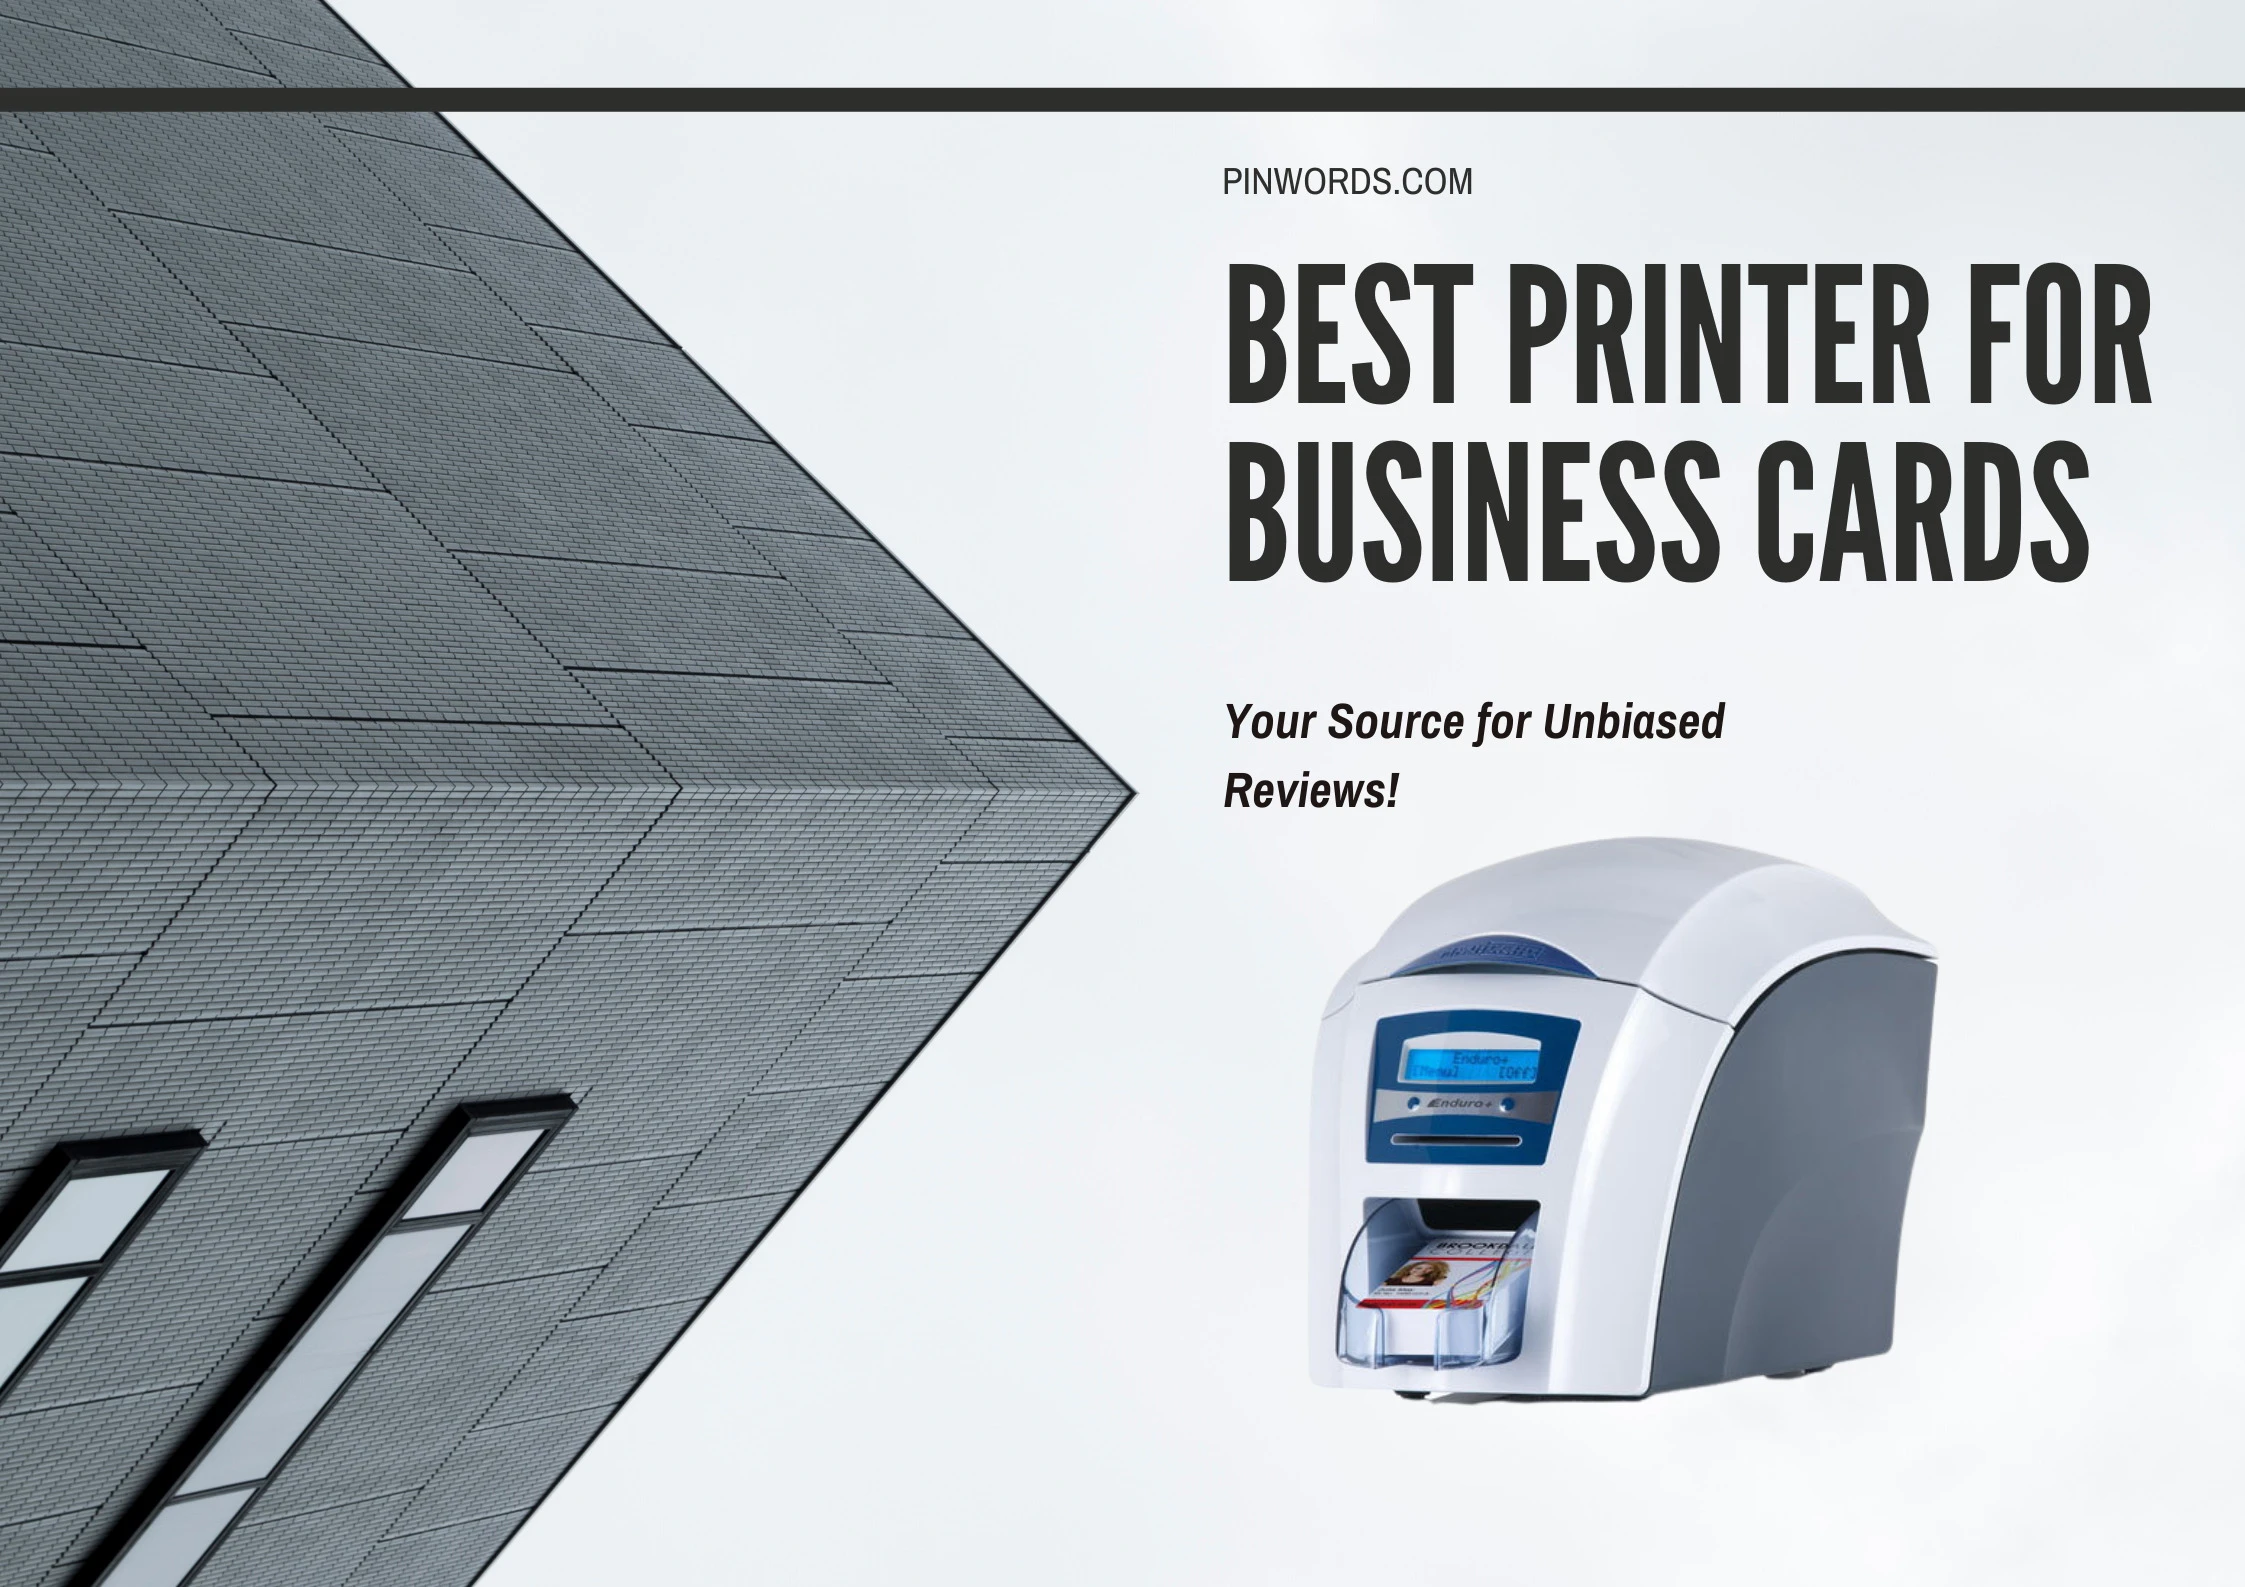  Best Printer for Business Cards Reviews 